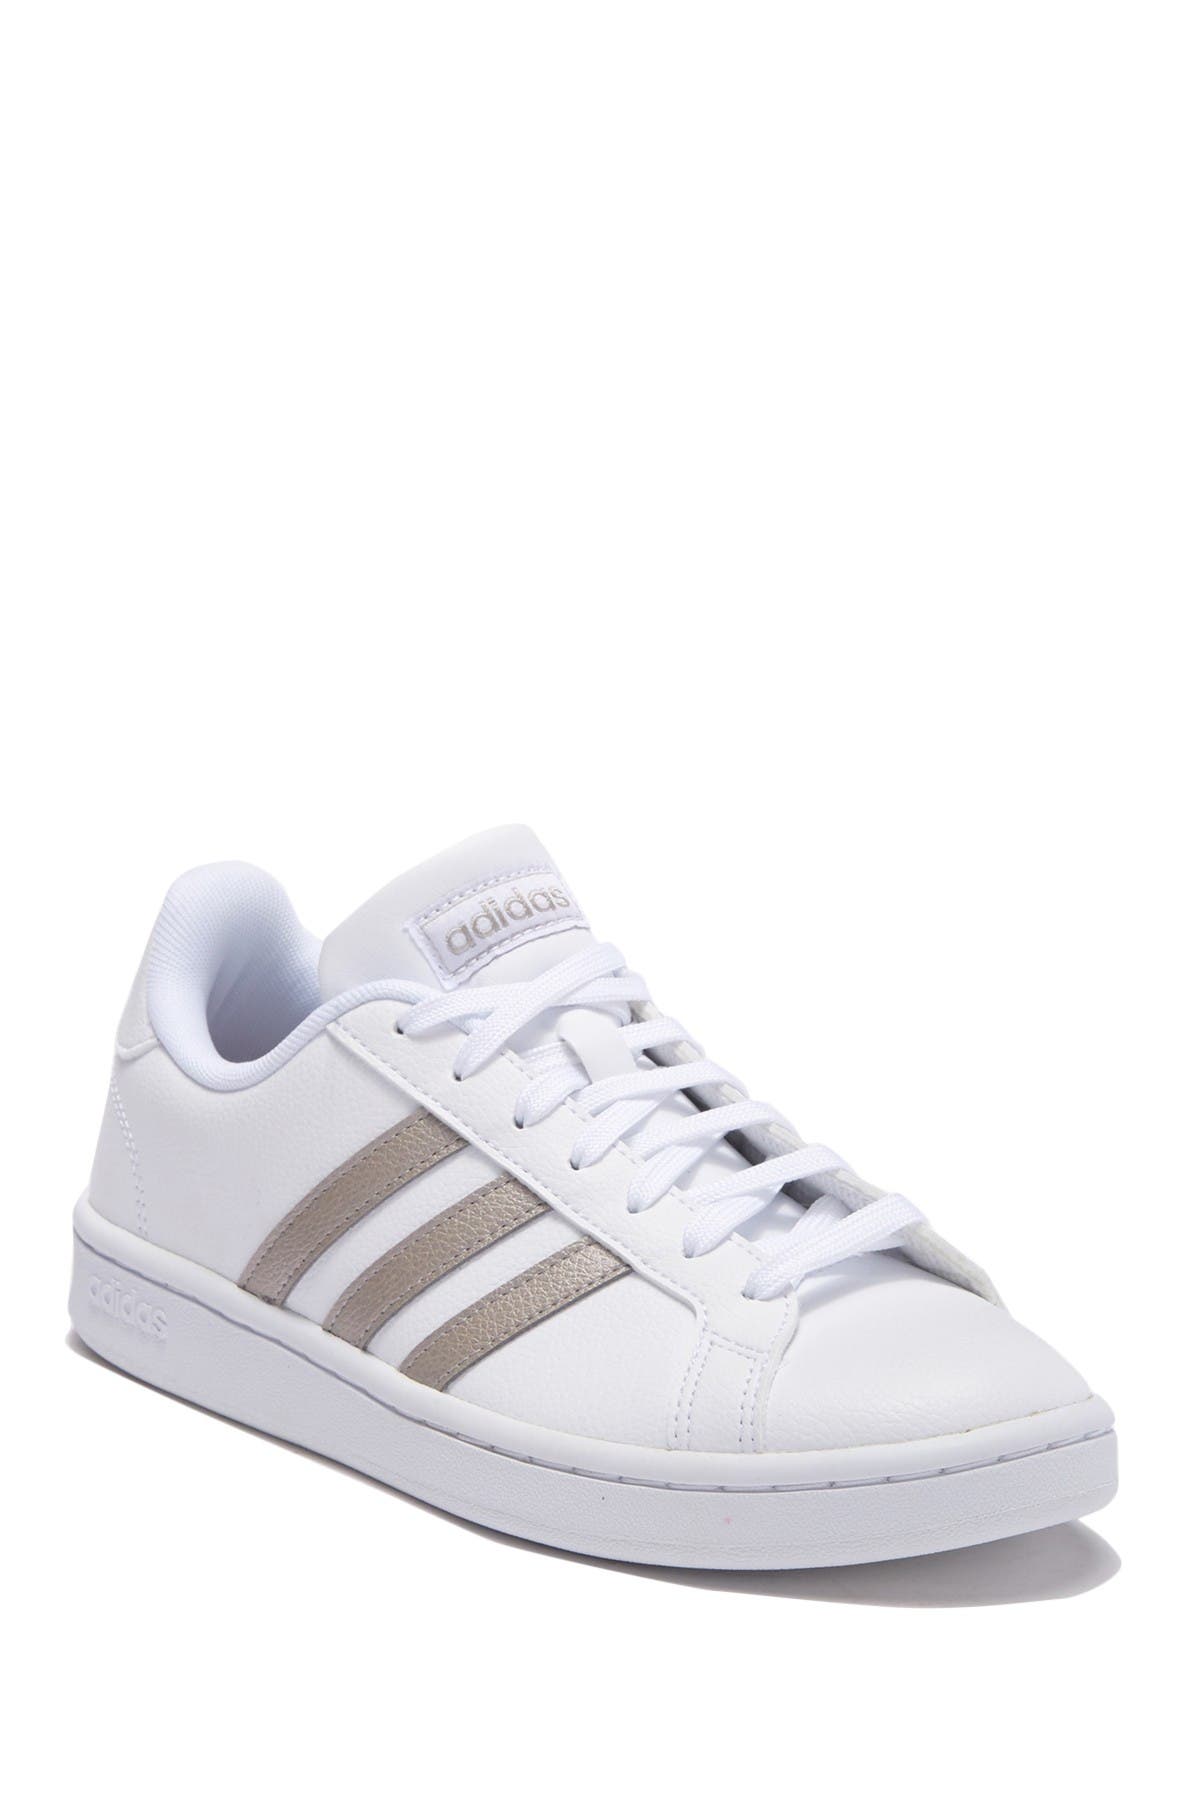 adidas | Grand Court Leather Sneaker 